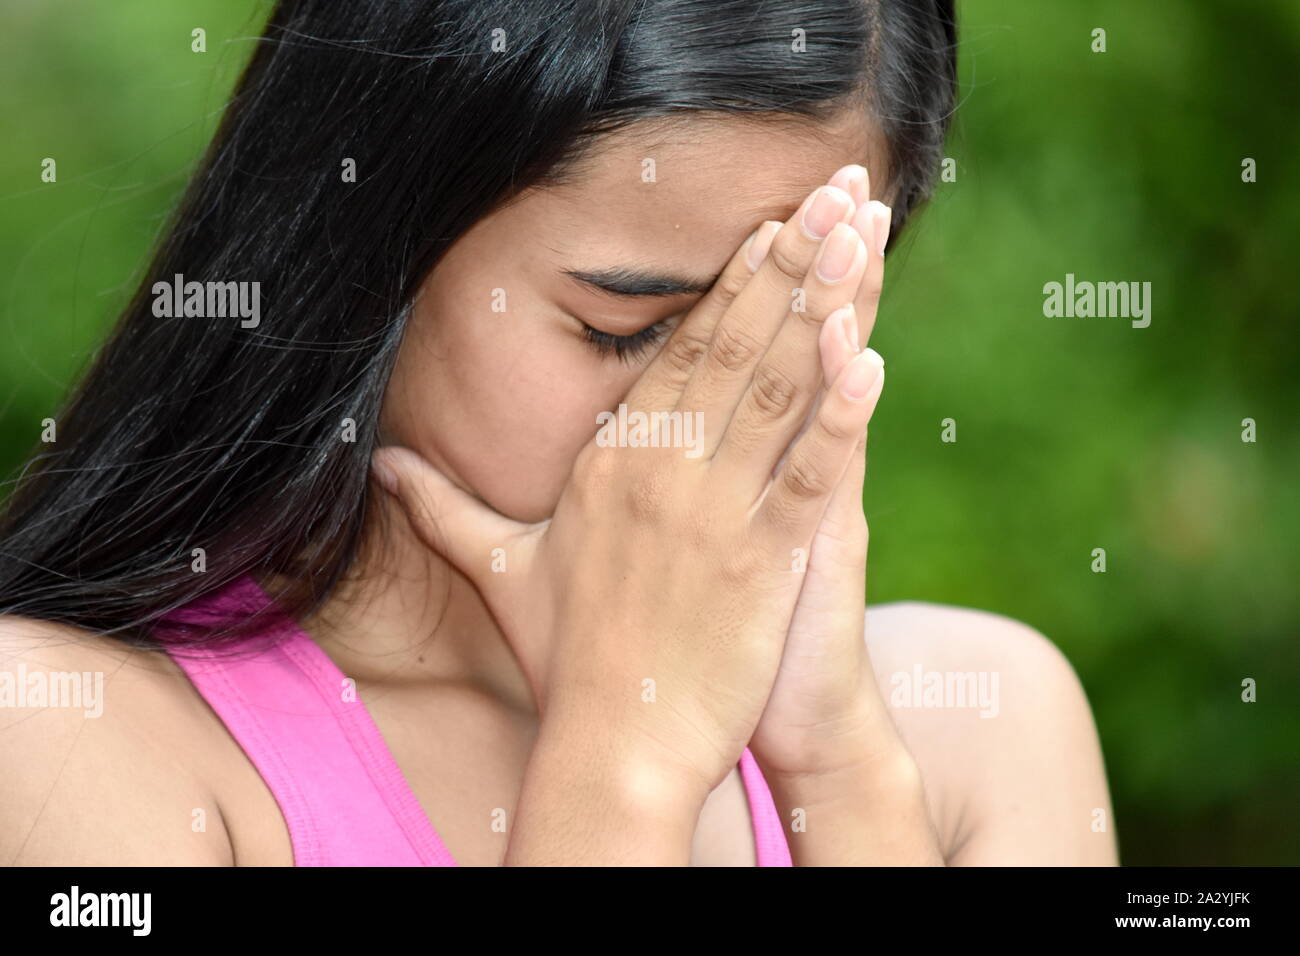 An A Female Youngster And Disappointment Stock Photo